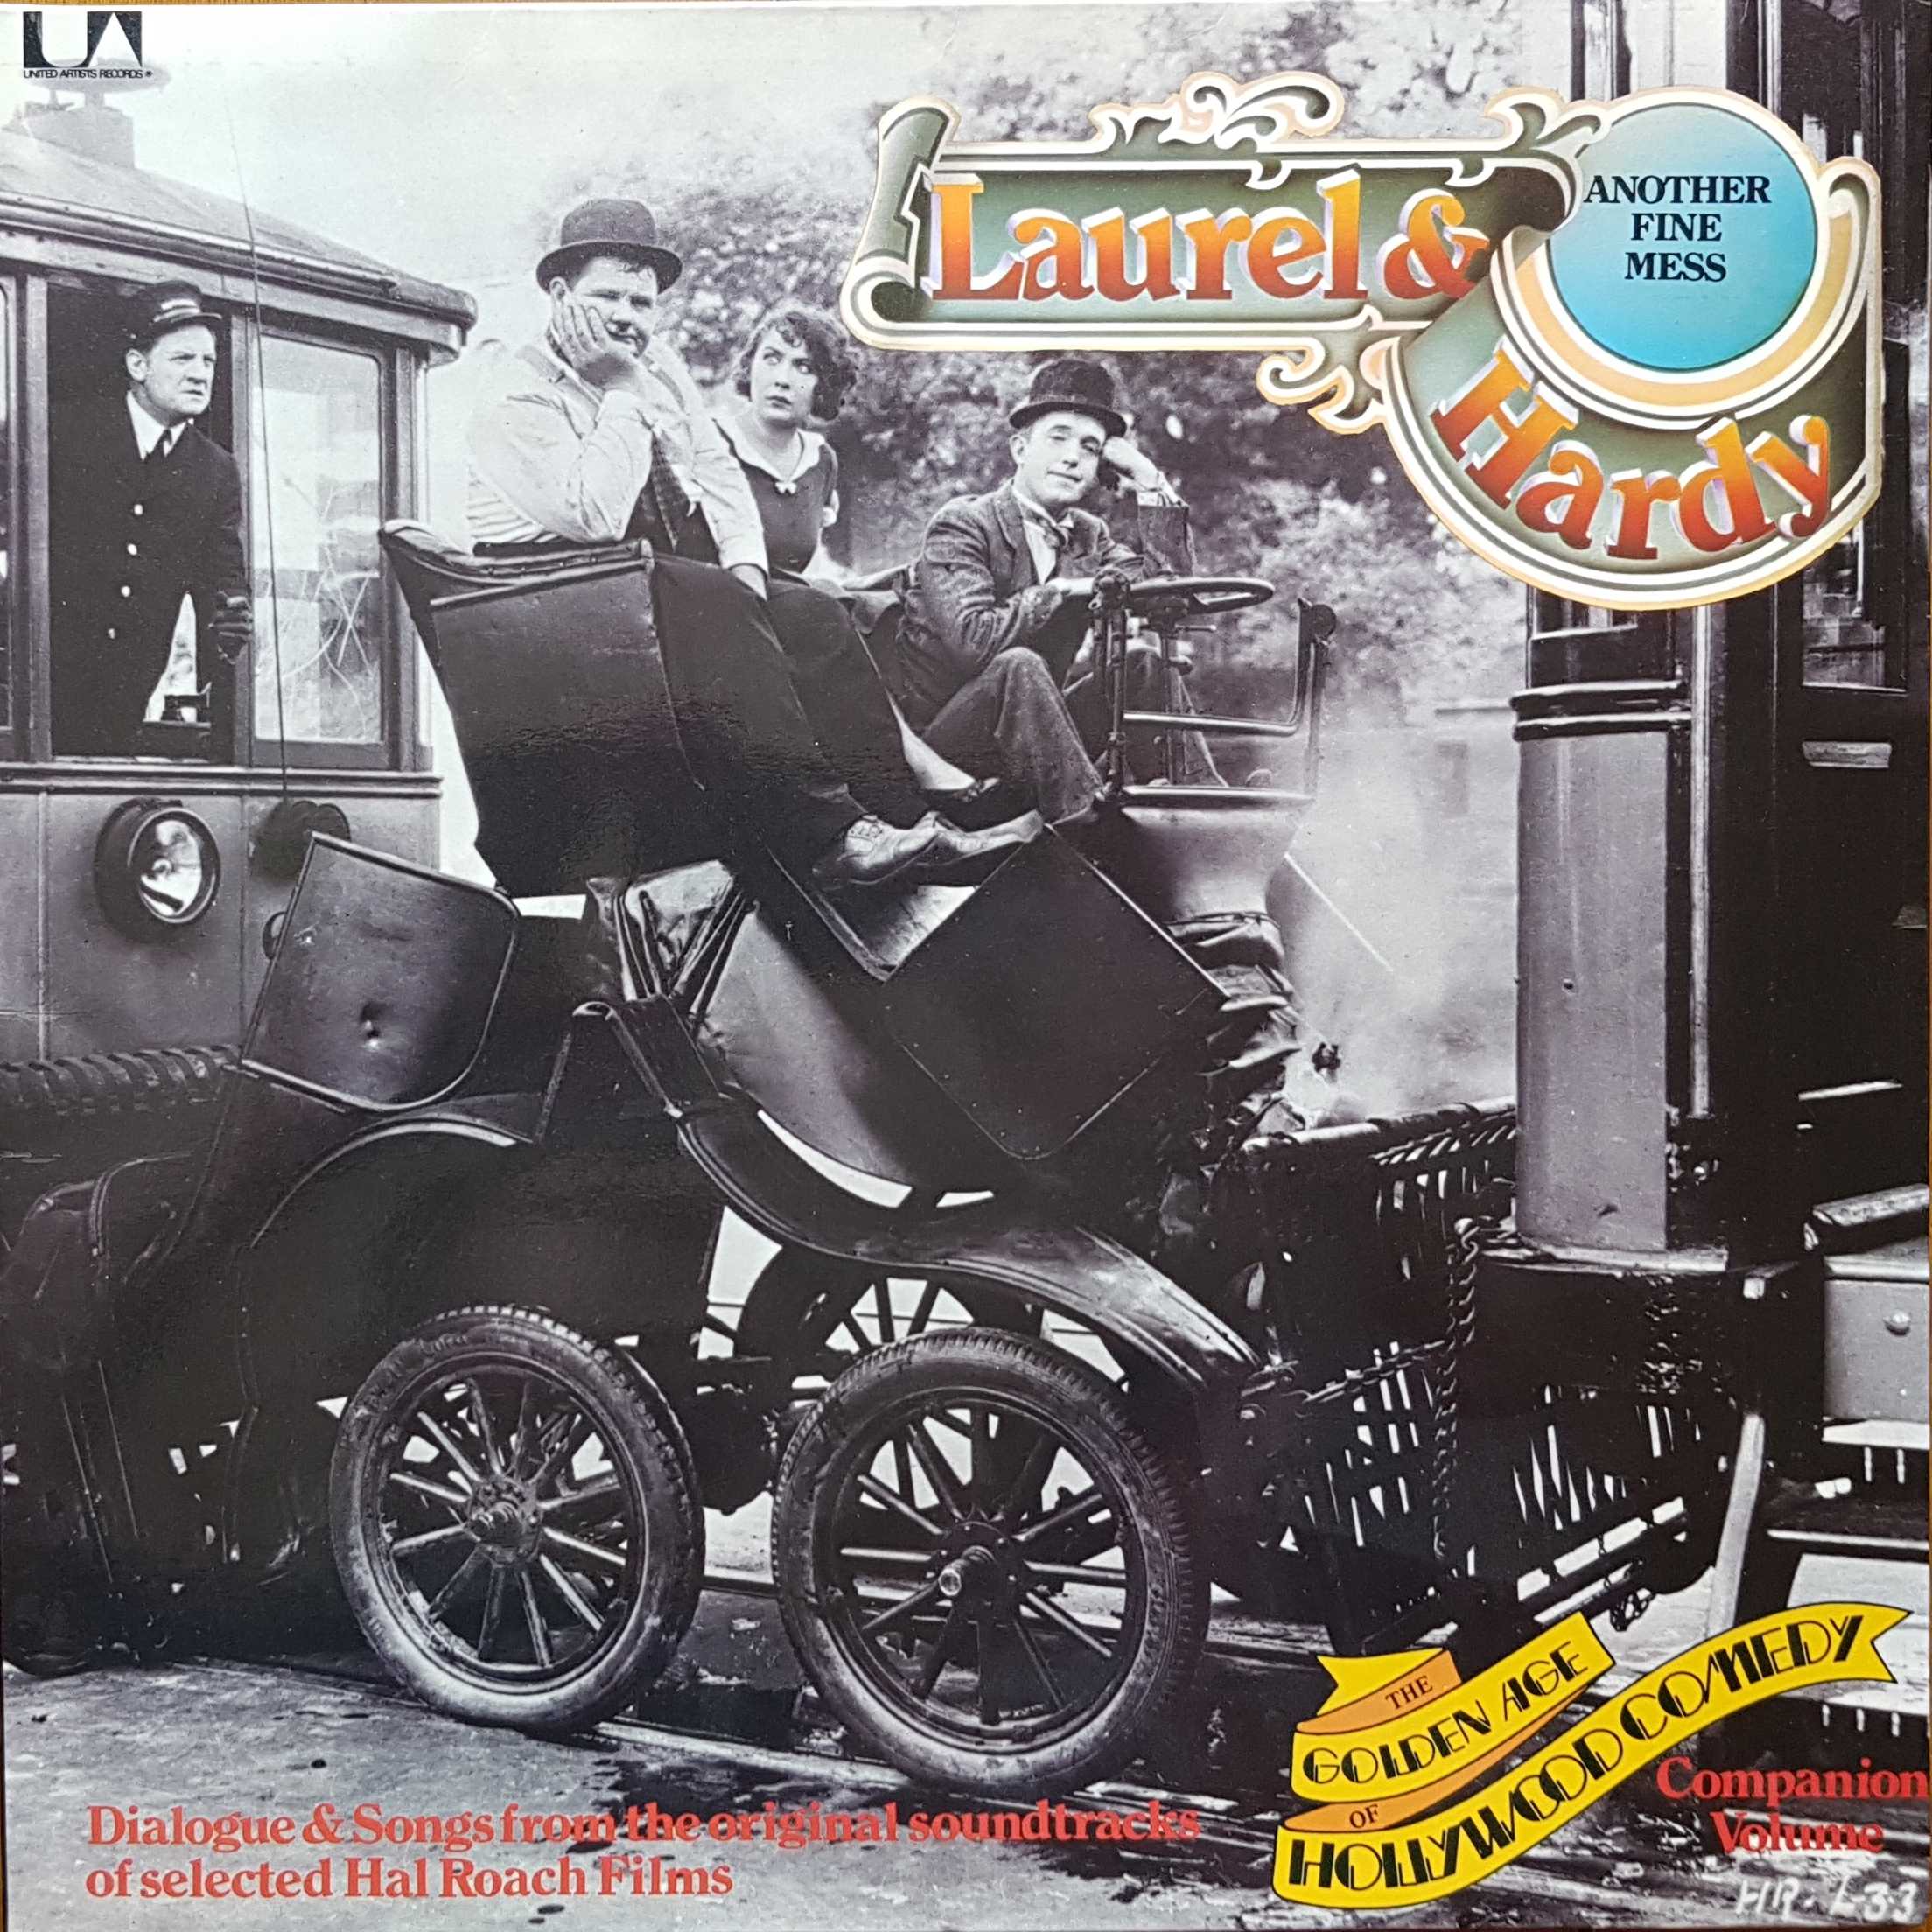 Picture of UAG 30010 Laurel & Hardy - Another fine mess by artist Laurel & Hardy from ITV, Channel 4 and Channel 5 albums library